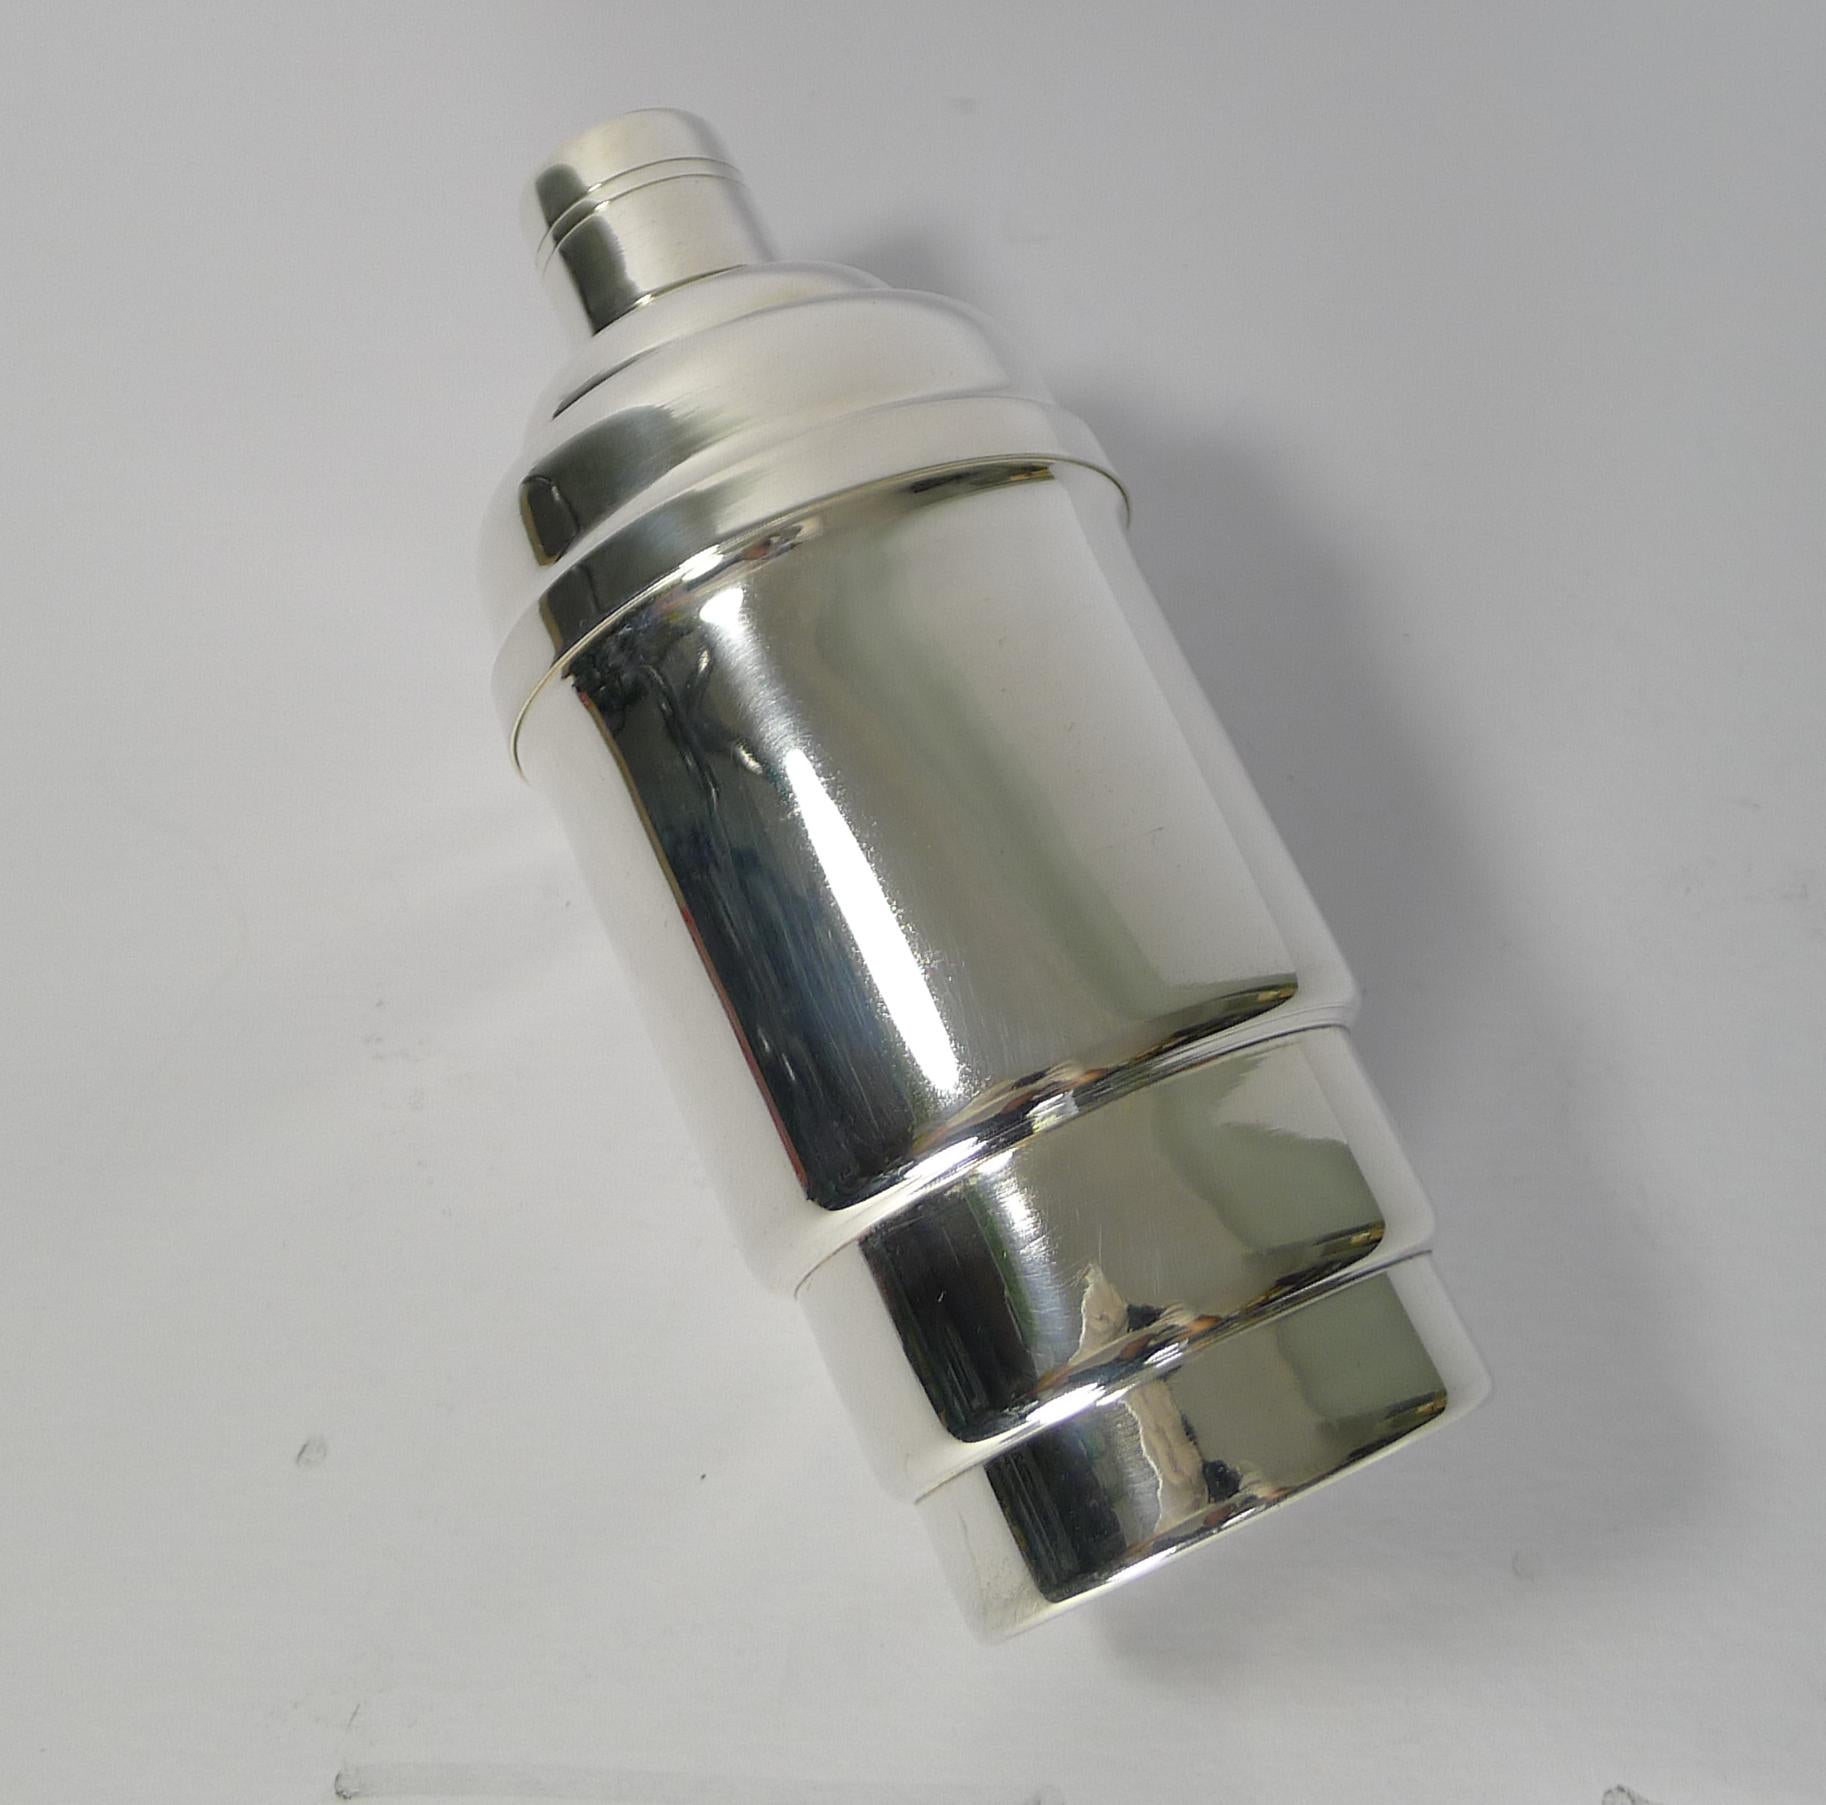 An unusually shaped and very handsome Art Deco cocktail shaker dating to the 1930s.

It's fabulous stepped design will look perfect on the most stylish of bars or bar trolleys.

Having just returned from our silversmith's workshop, it has been